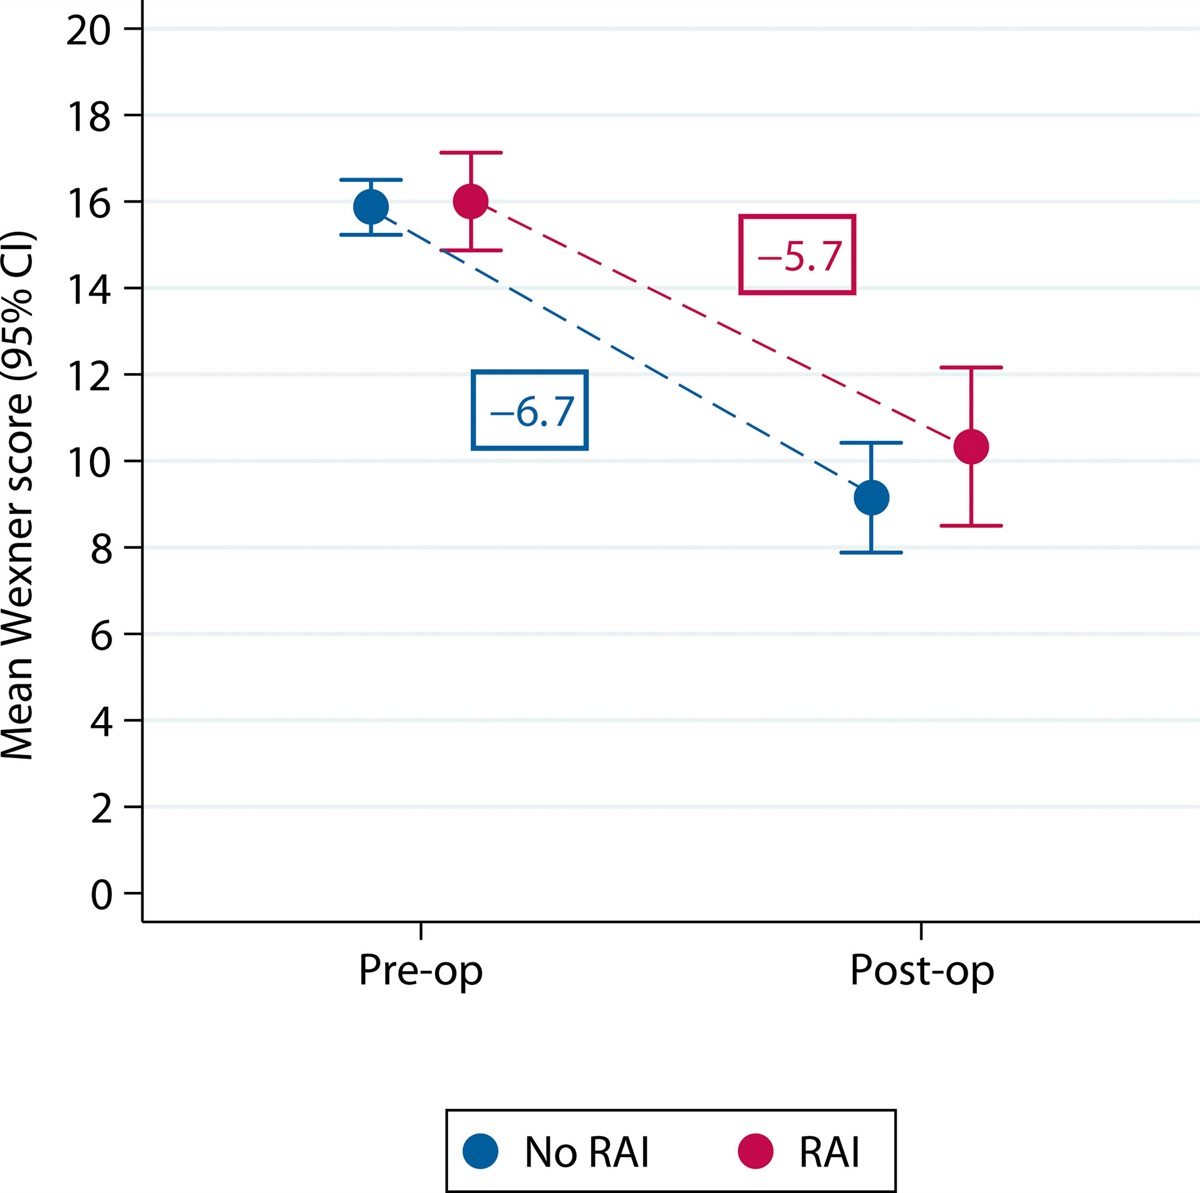 Does Rectoanal Intussusception Limit Improvements in Clinical Outcome and Quality of Life After Sacral Nerve Stimulation for Fecal Incontinence?